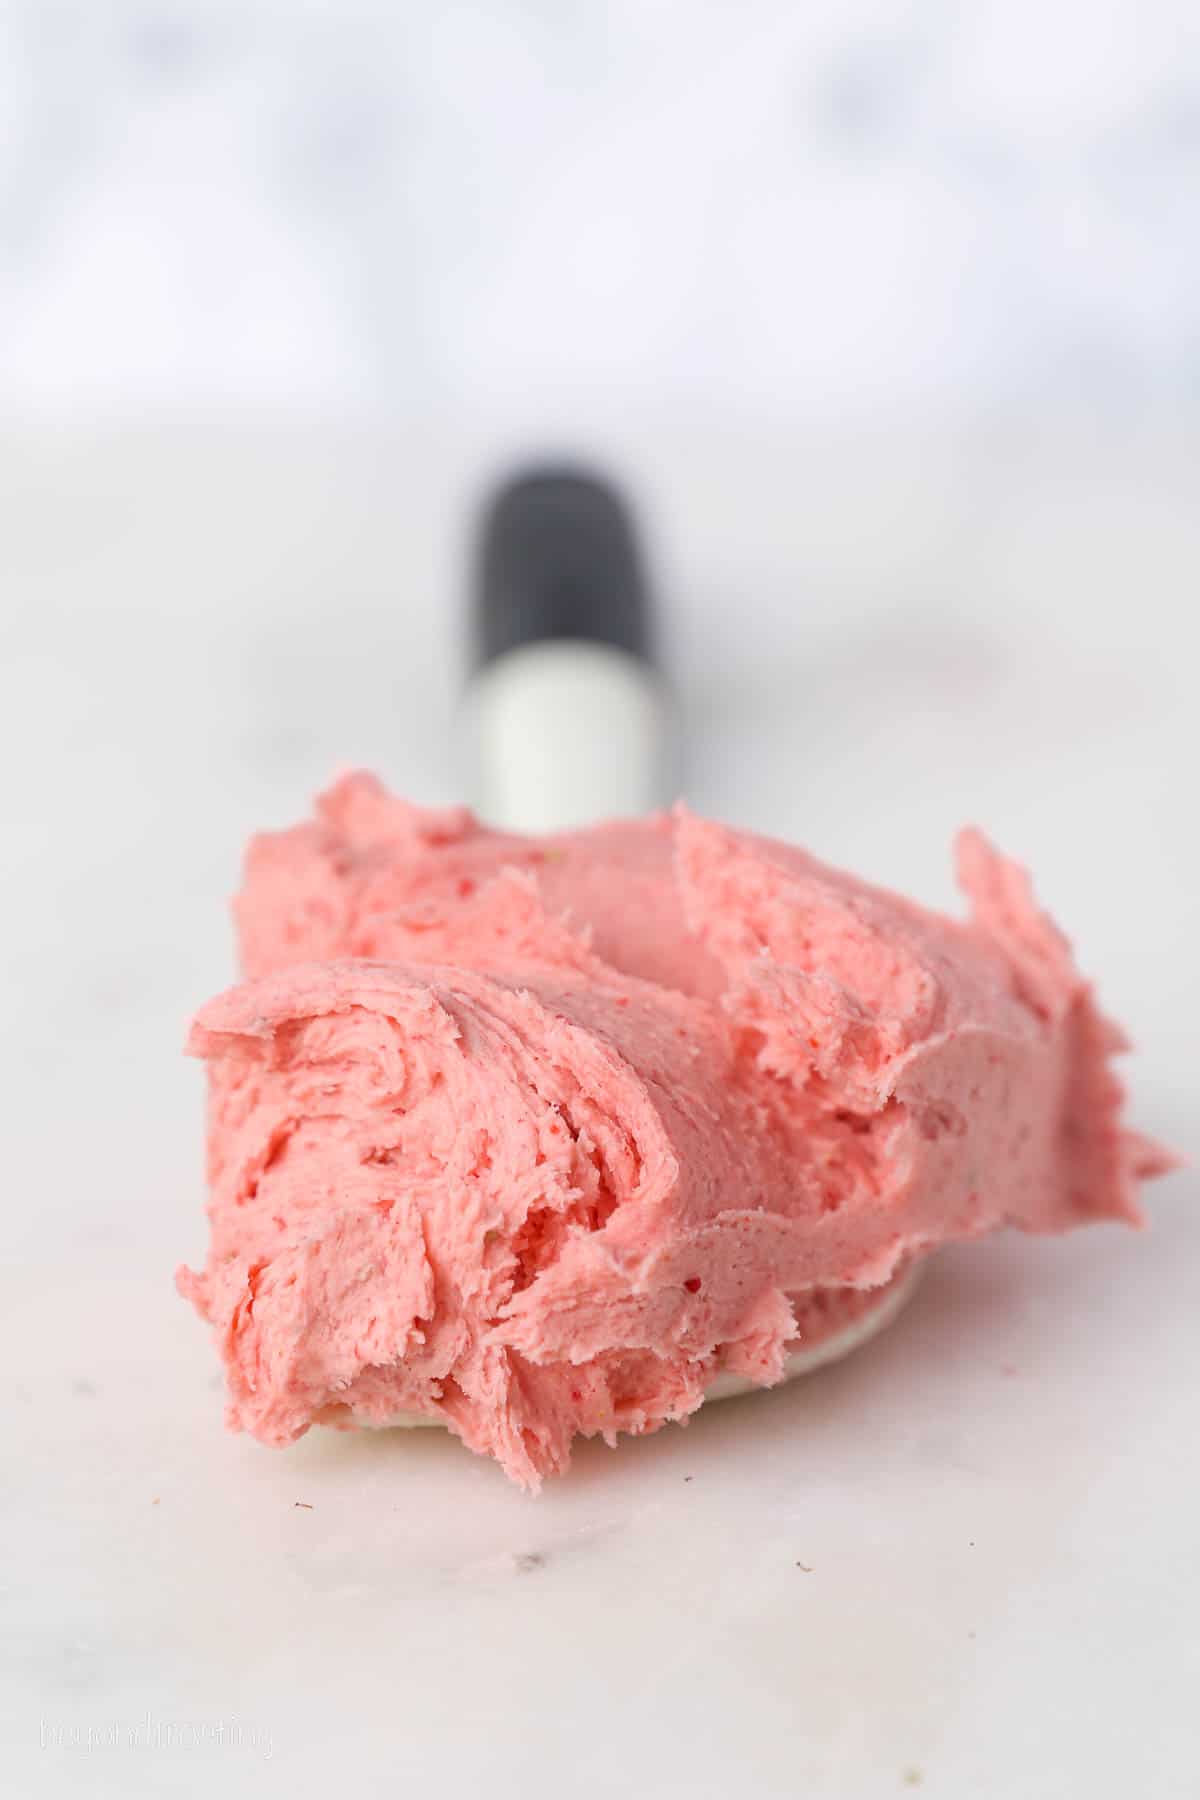 Strawberry buttercream frosting coating the end of a spatula laying on a countertop.